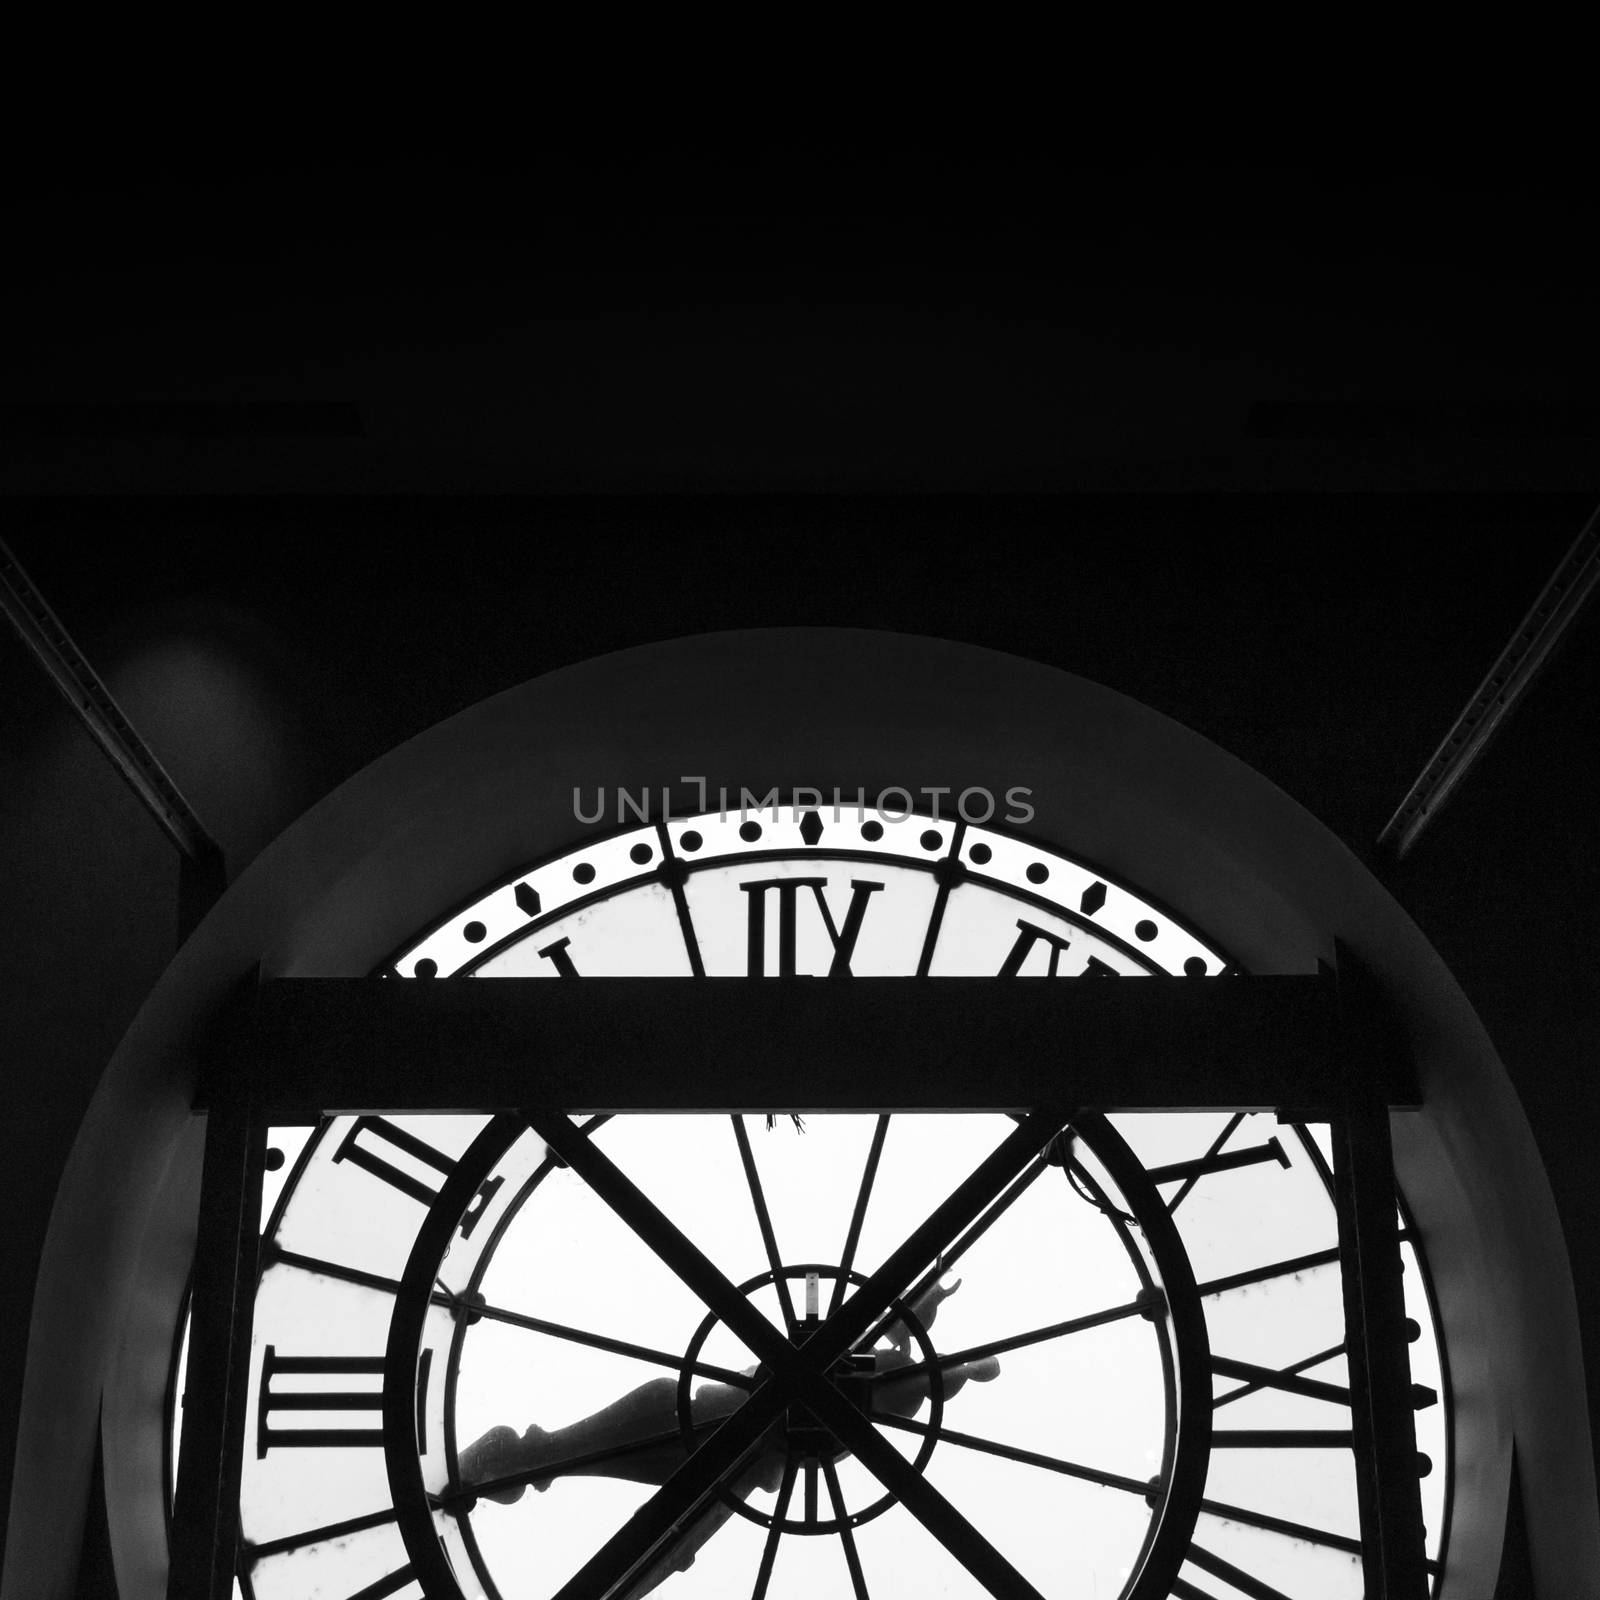 Orsay Museum (Musee d'Orsay) clock in Paris by siraanamwong